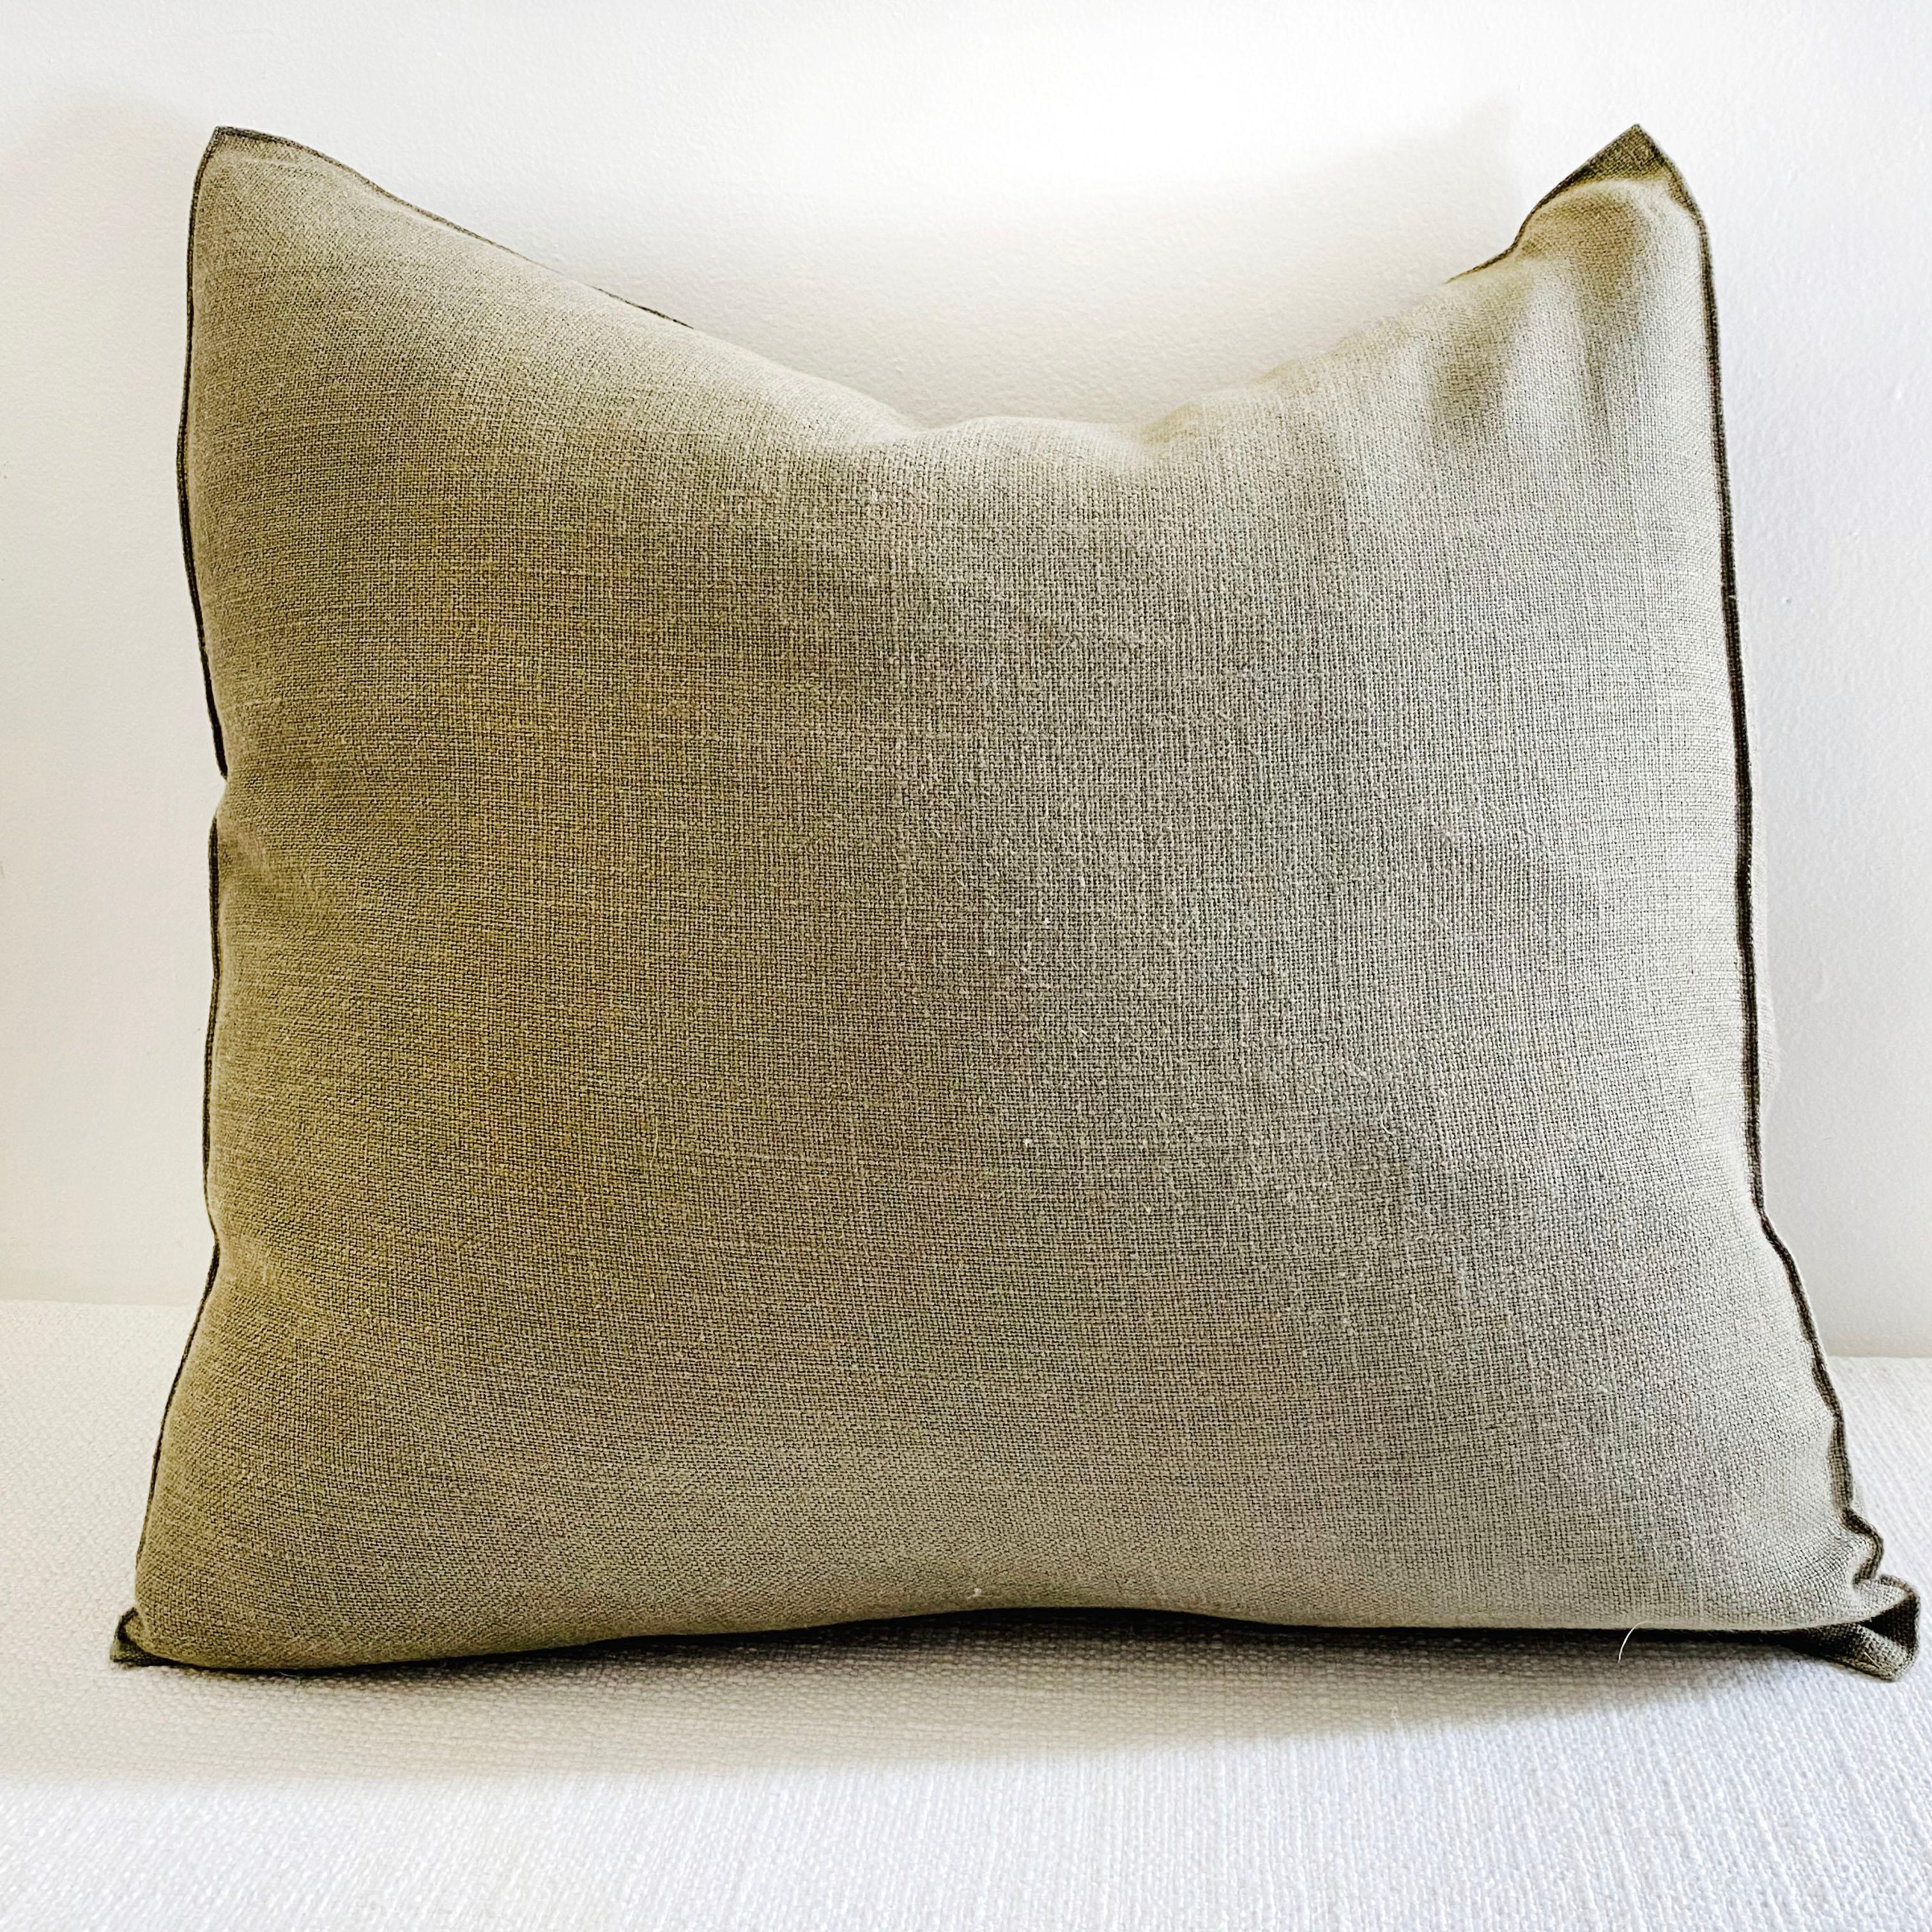 Contemporary New Belgian Linen Accent Pillow Cover in Kaki Color